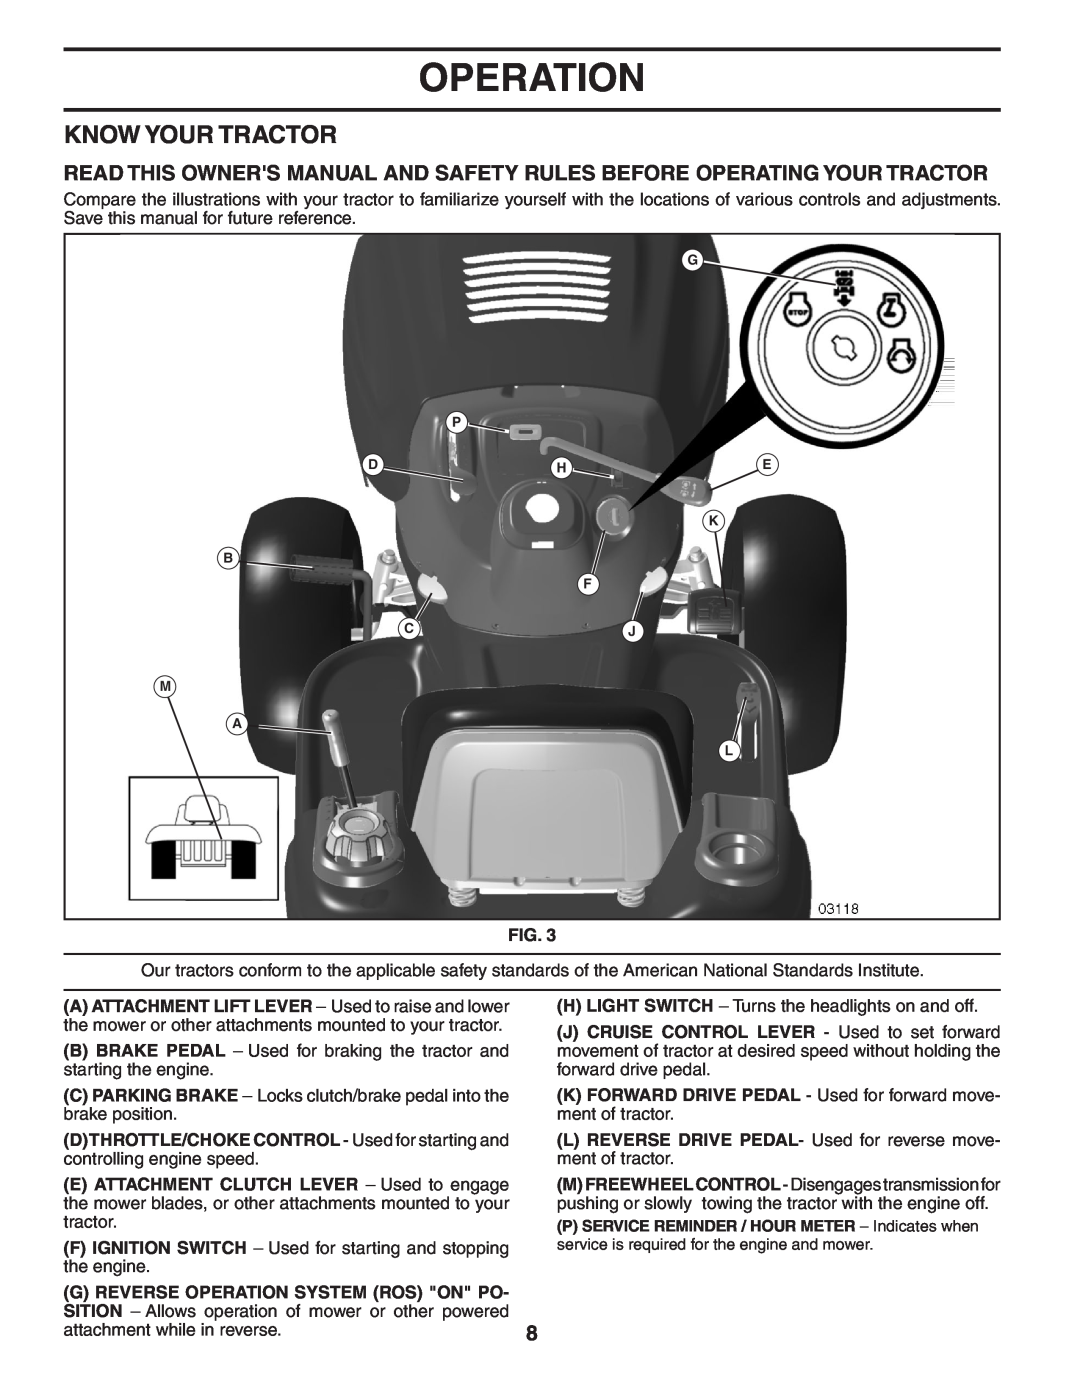 Poulan C20H42YT manual Know Your Tractor, Operation 